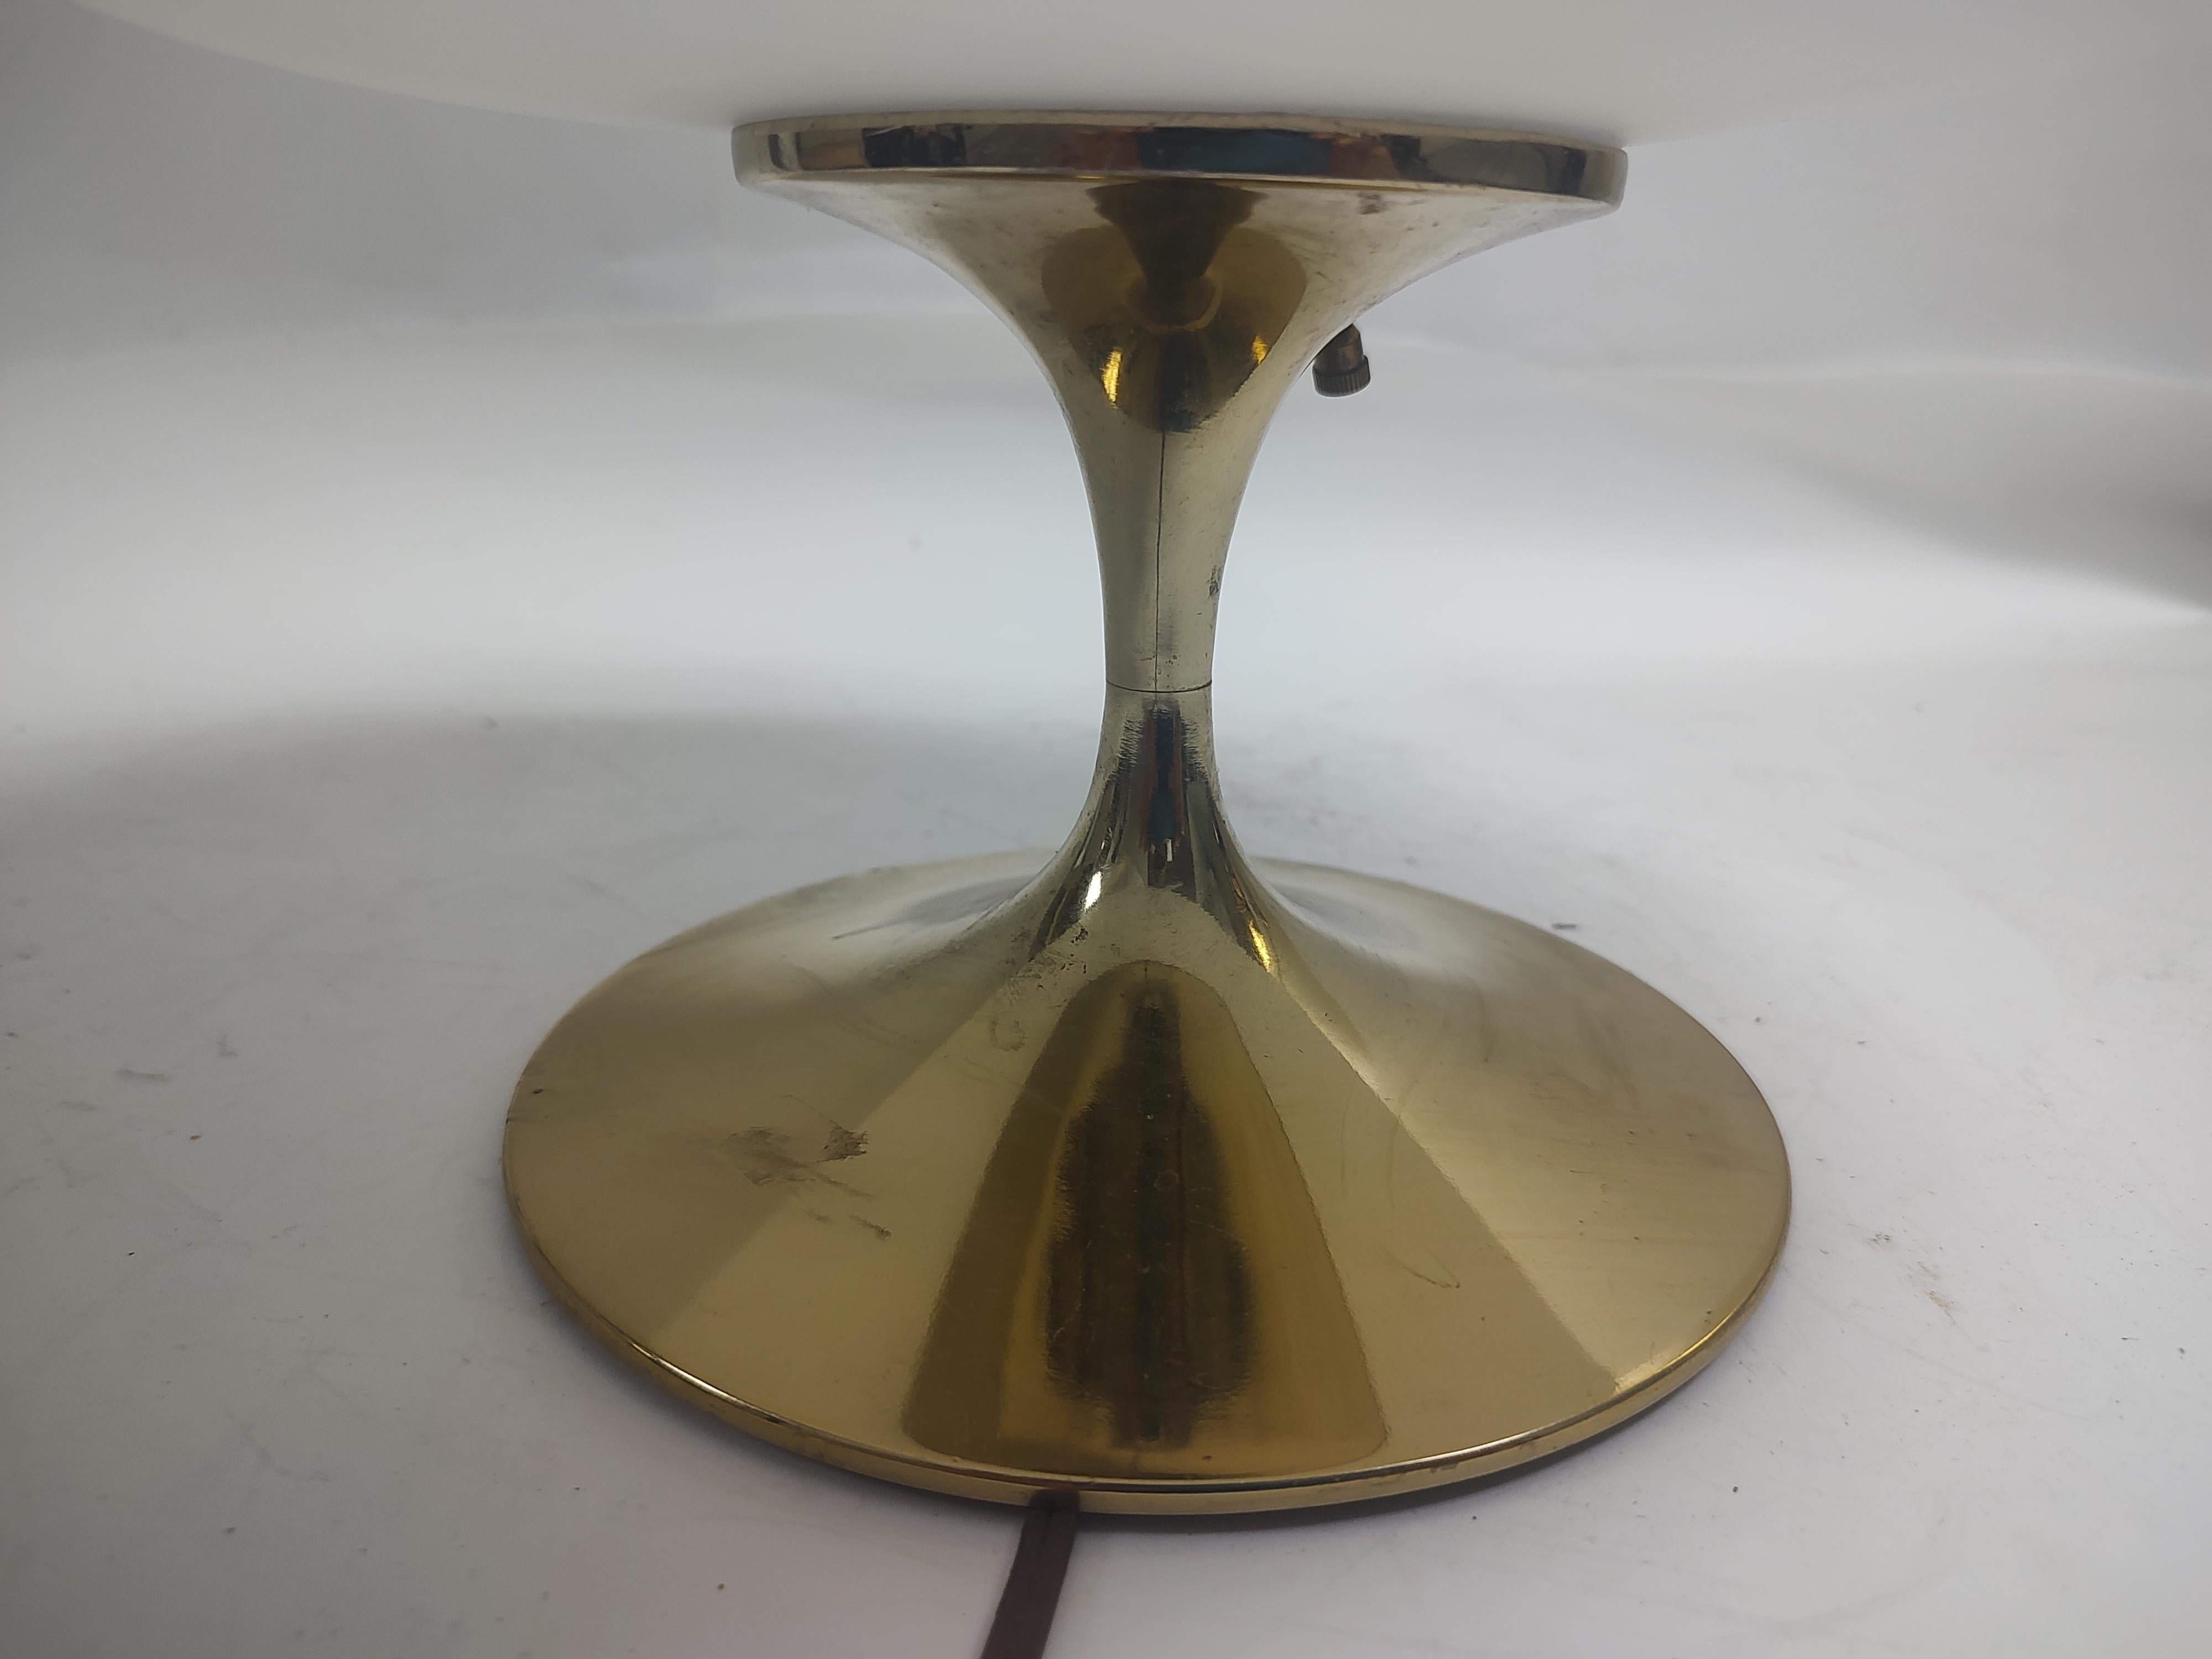 Hand-Crafted Mid Century Modern Sculptural Mushroom Table Lamp Attributed to Laurel Lamp Co.